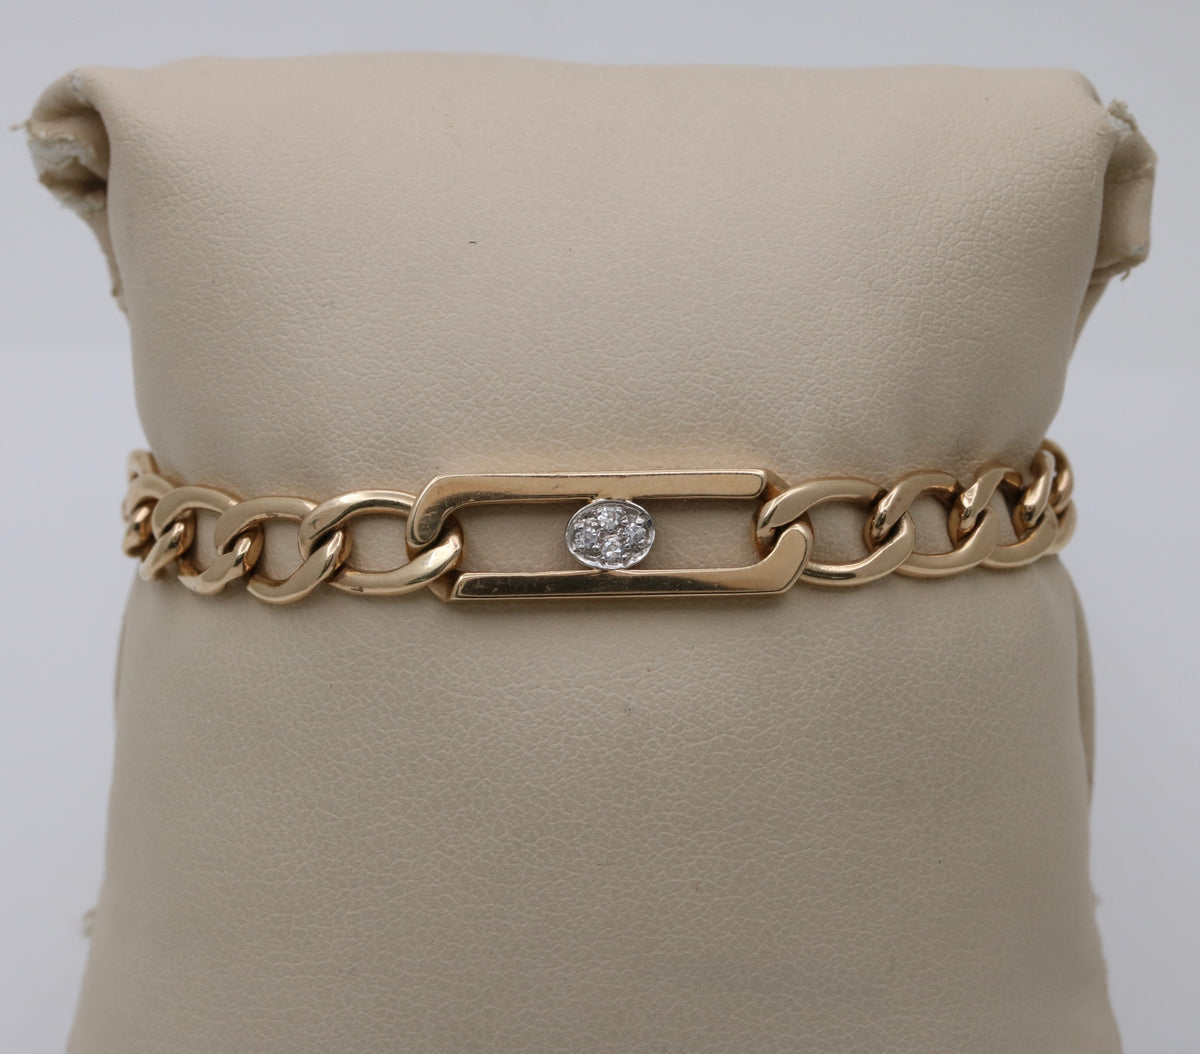 Vintage Solid 14k Yellow Gold Elongated Curb Link Chain 